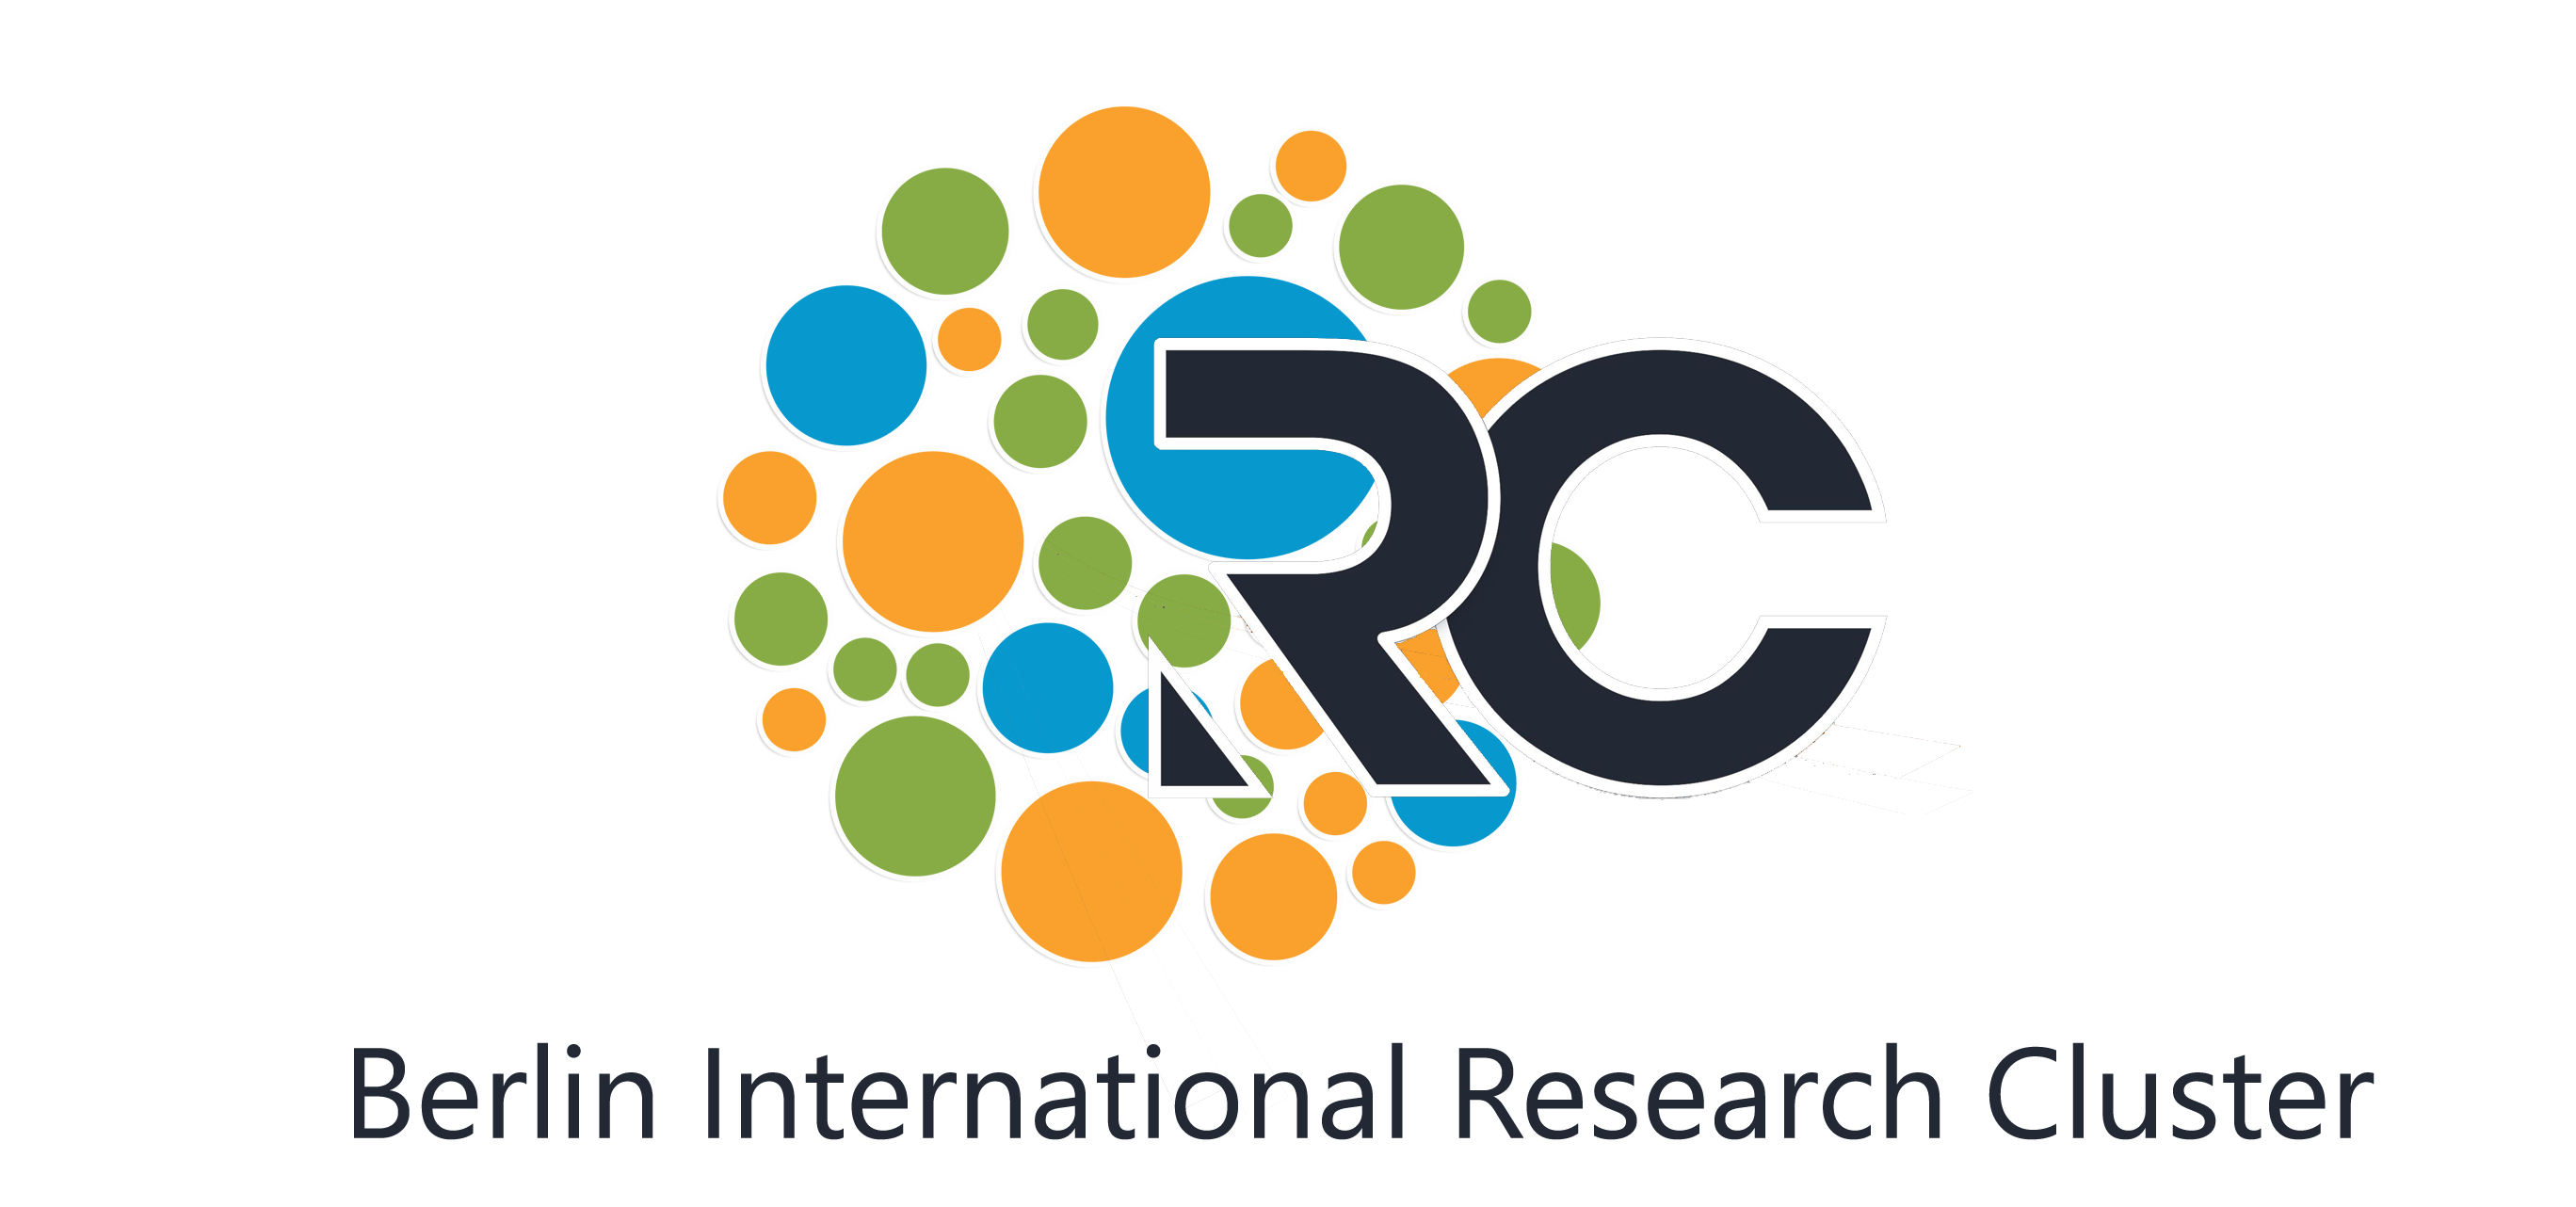 2nd International conference on Economic Impact of Entrepreneurship and Social Science Research on Society. EESR